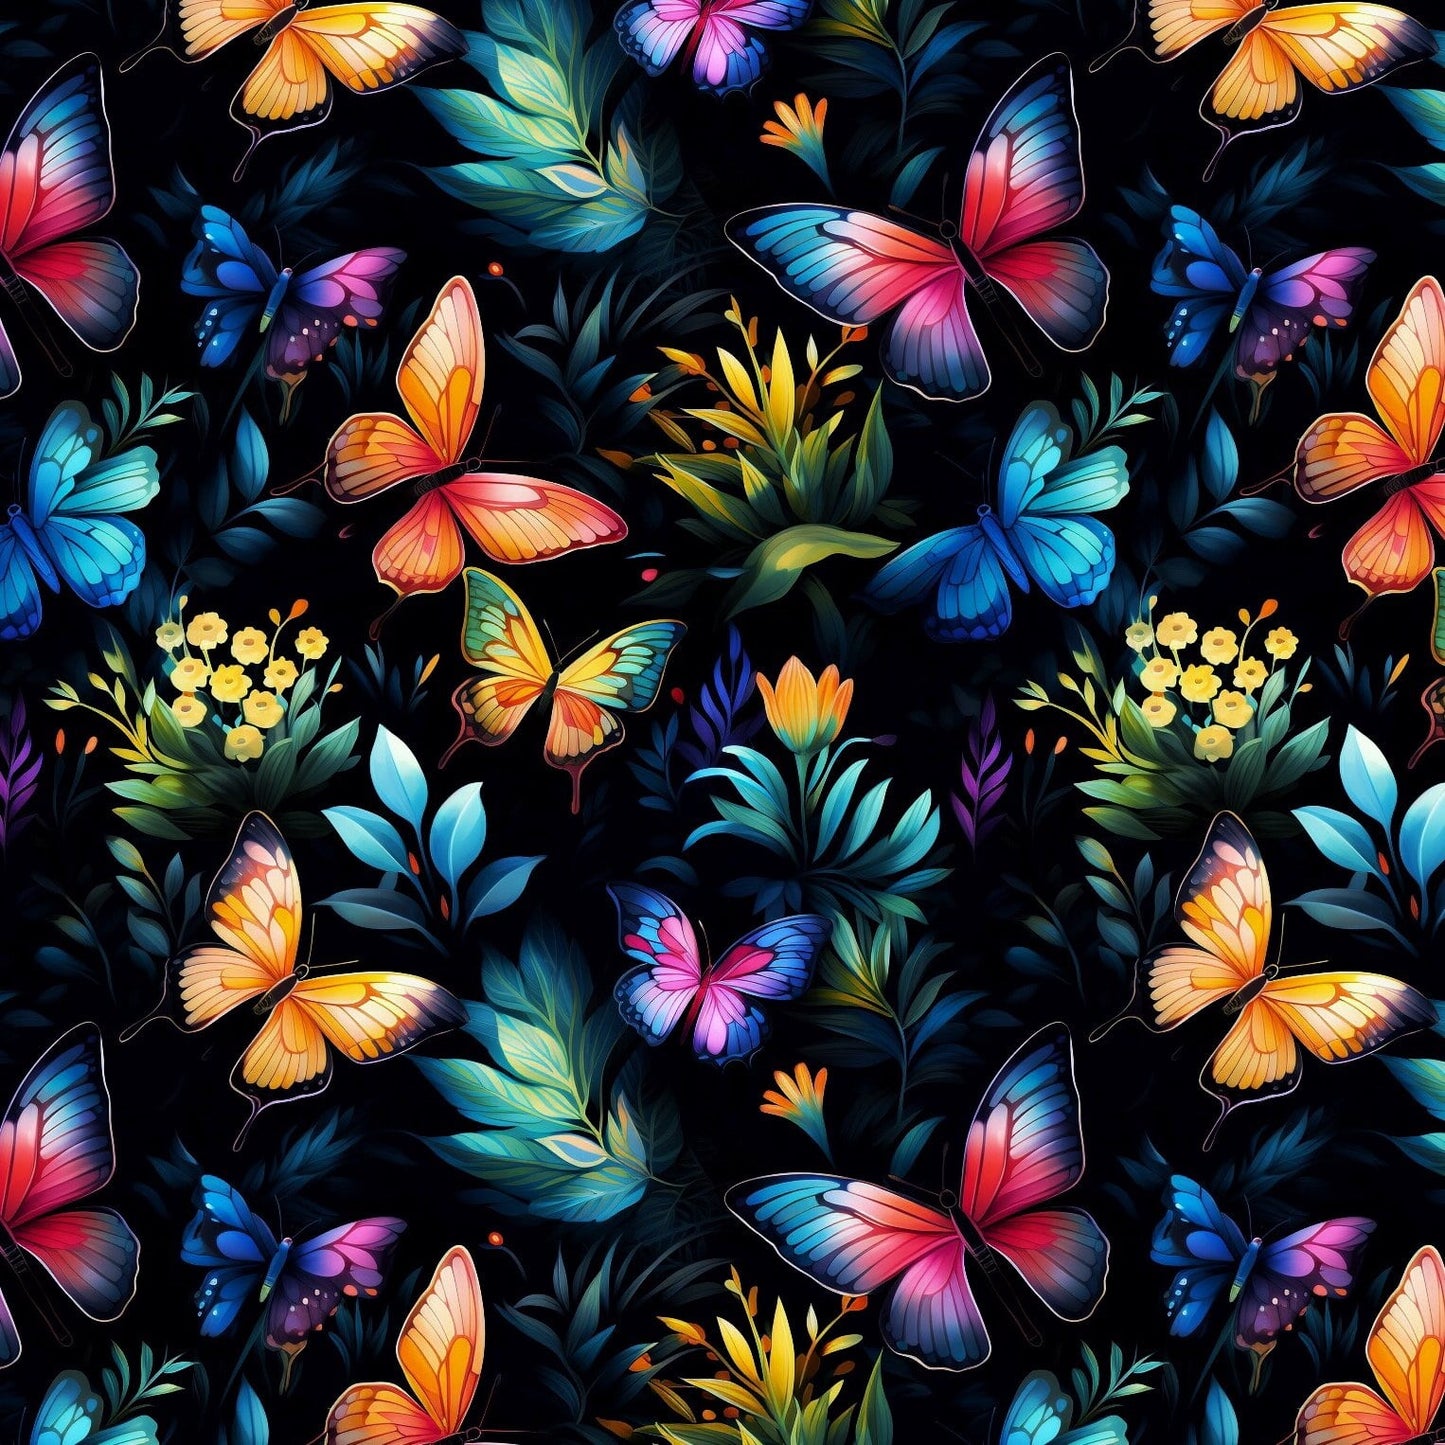 Botanical pattern wallpaper with floral and butterfly